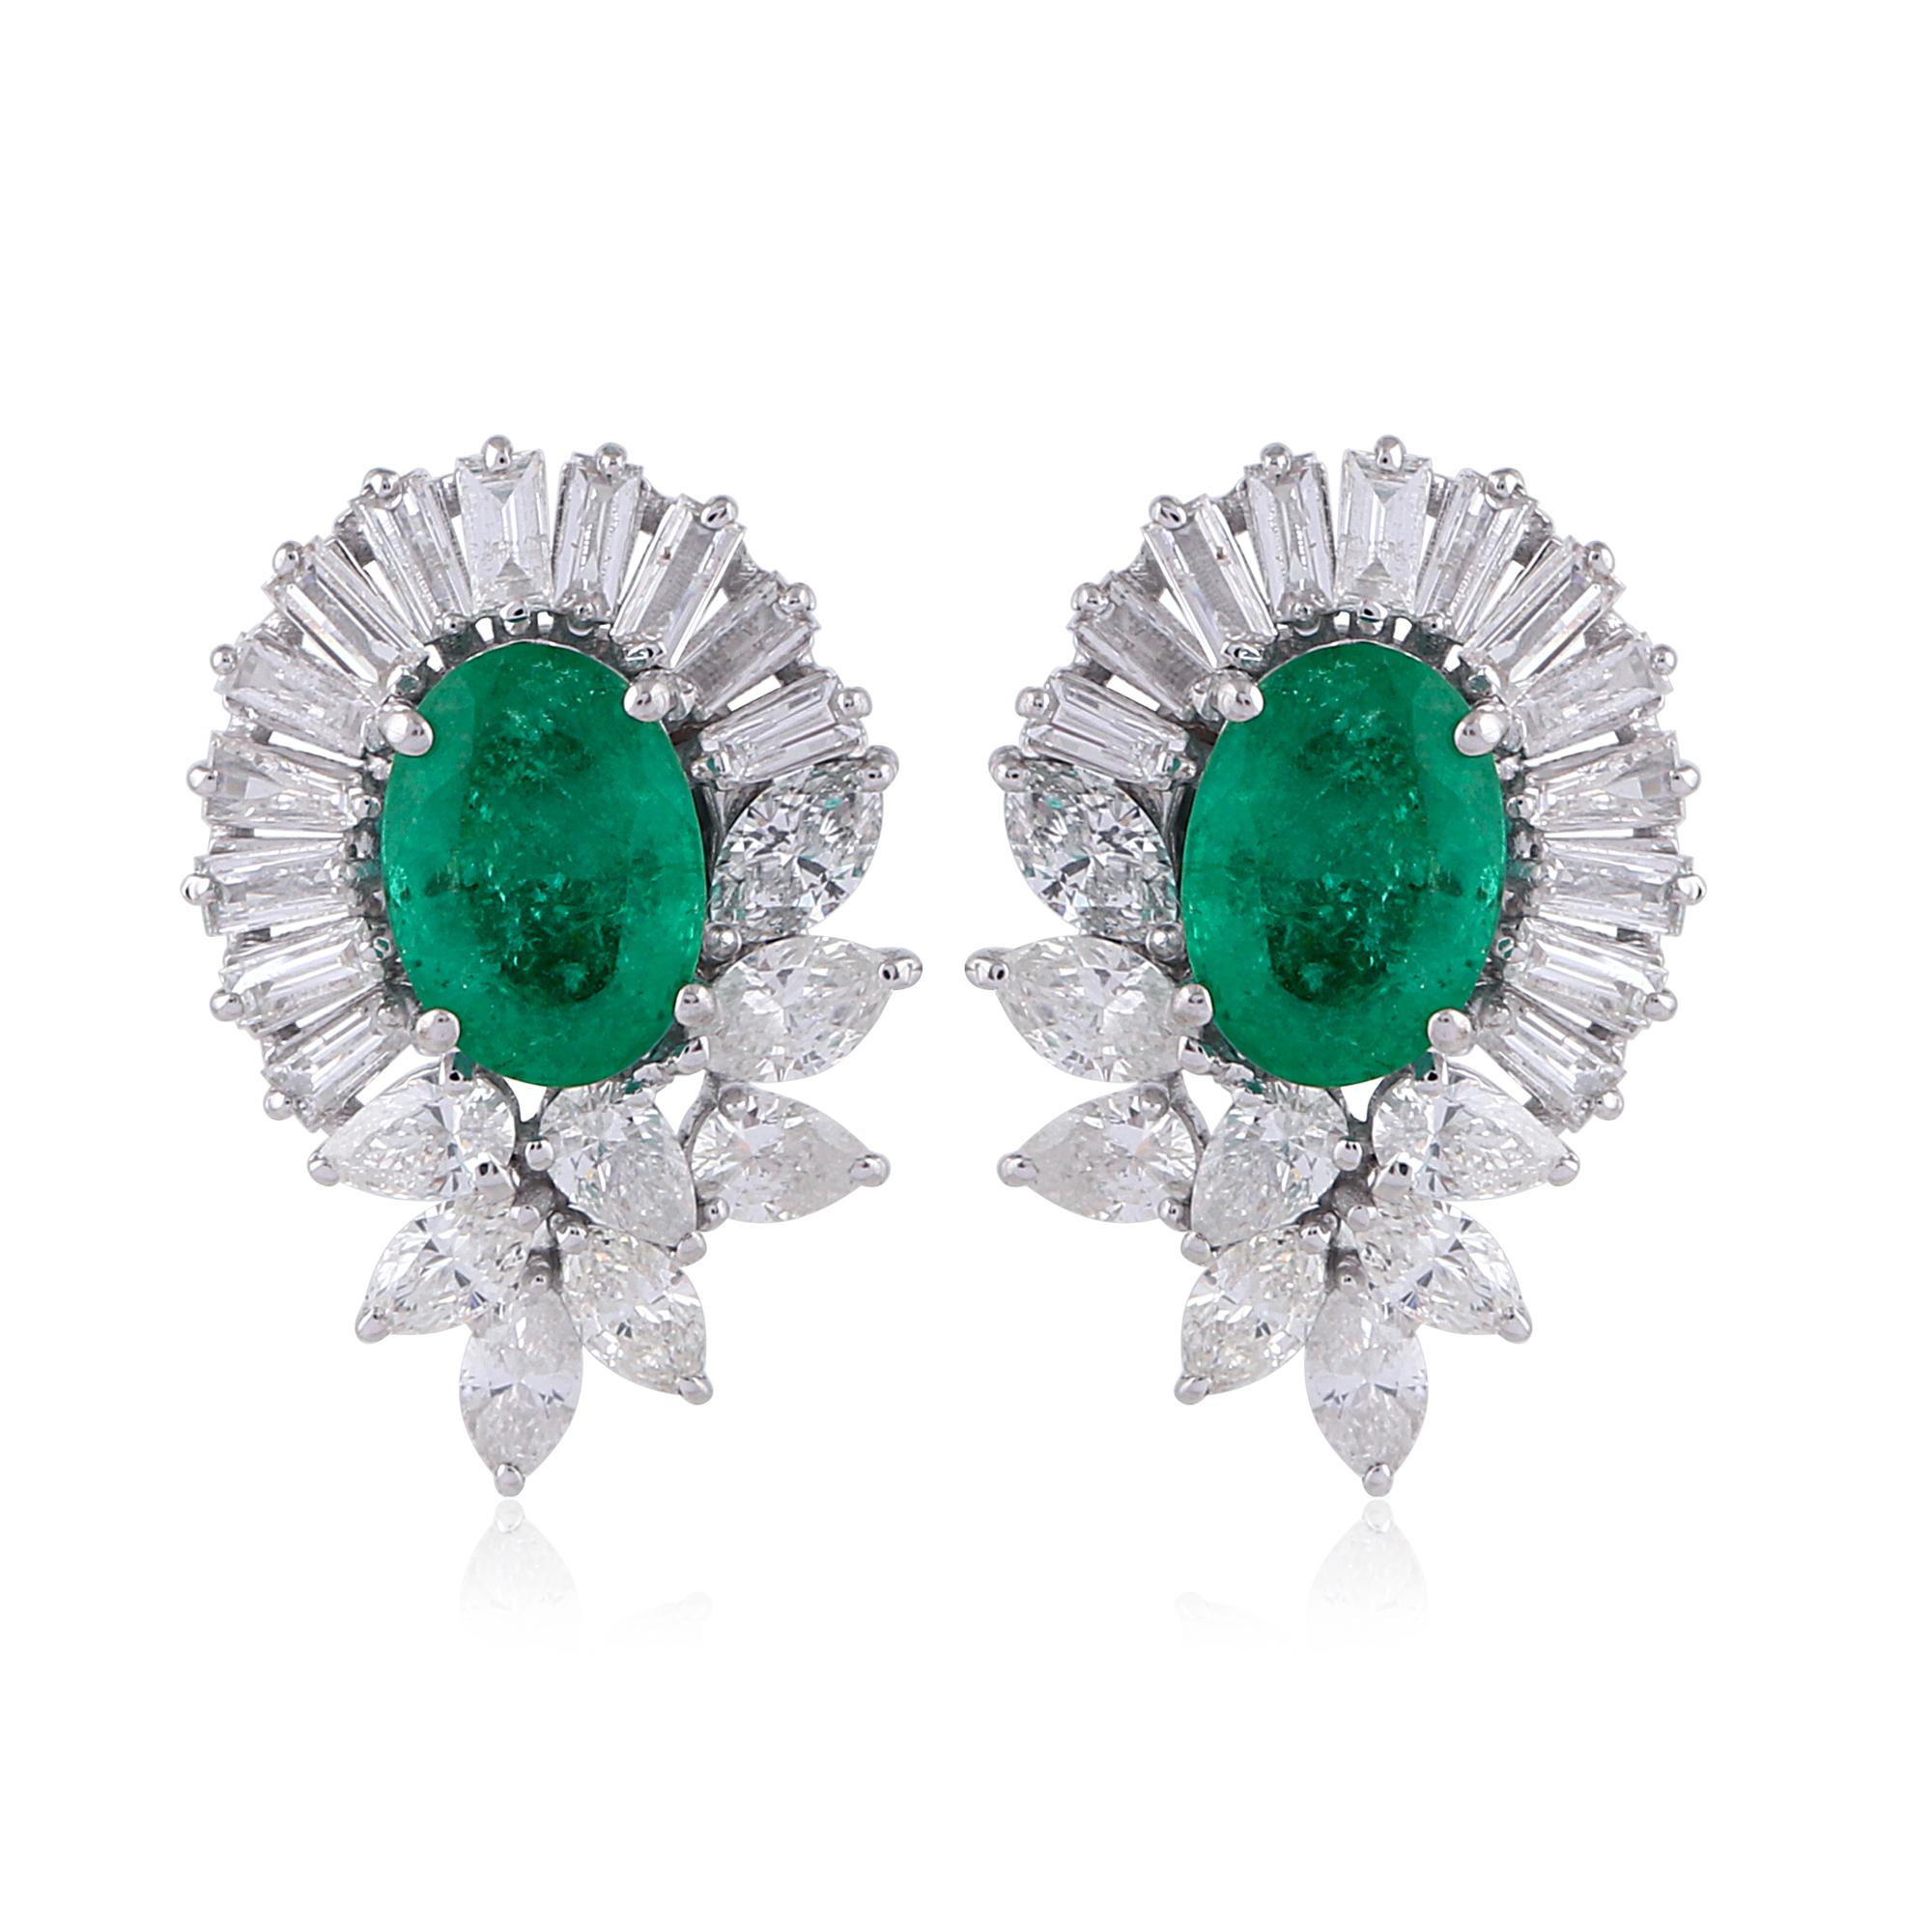 Item Code :- SEE-1016 (14k)
Gross Wt :- 3.63 gm
14k White Gold Wt :- 3.04 gm
Diamond Wt :- 1.50 ct ( SI Clarity & HI Color )
Emerald Wt :- 1.44 ct 
Earrings Size :- 17.44x11.70 mm approx.

✦ Sizing
.....................
We can adjust most items to